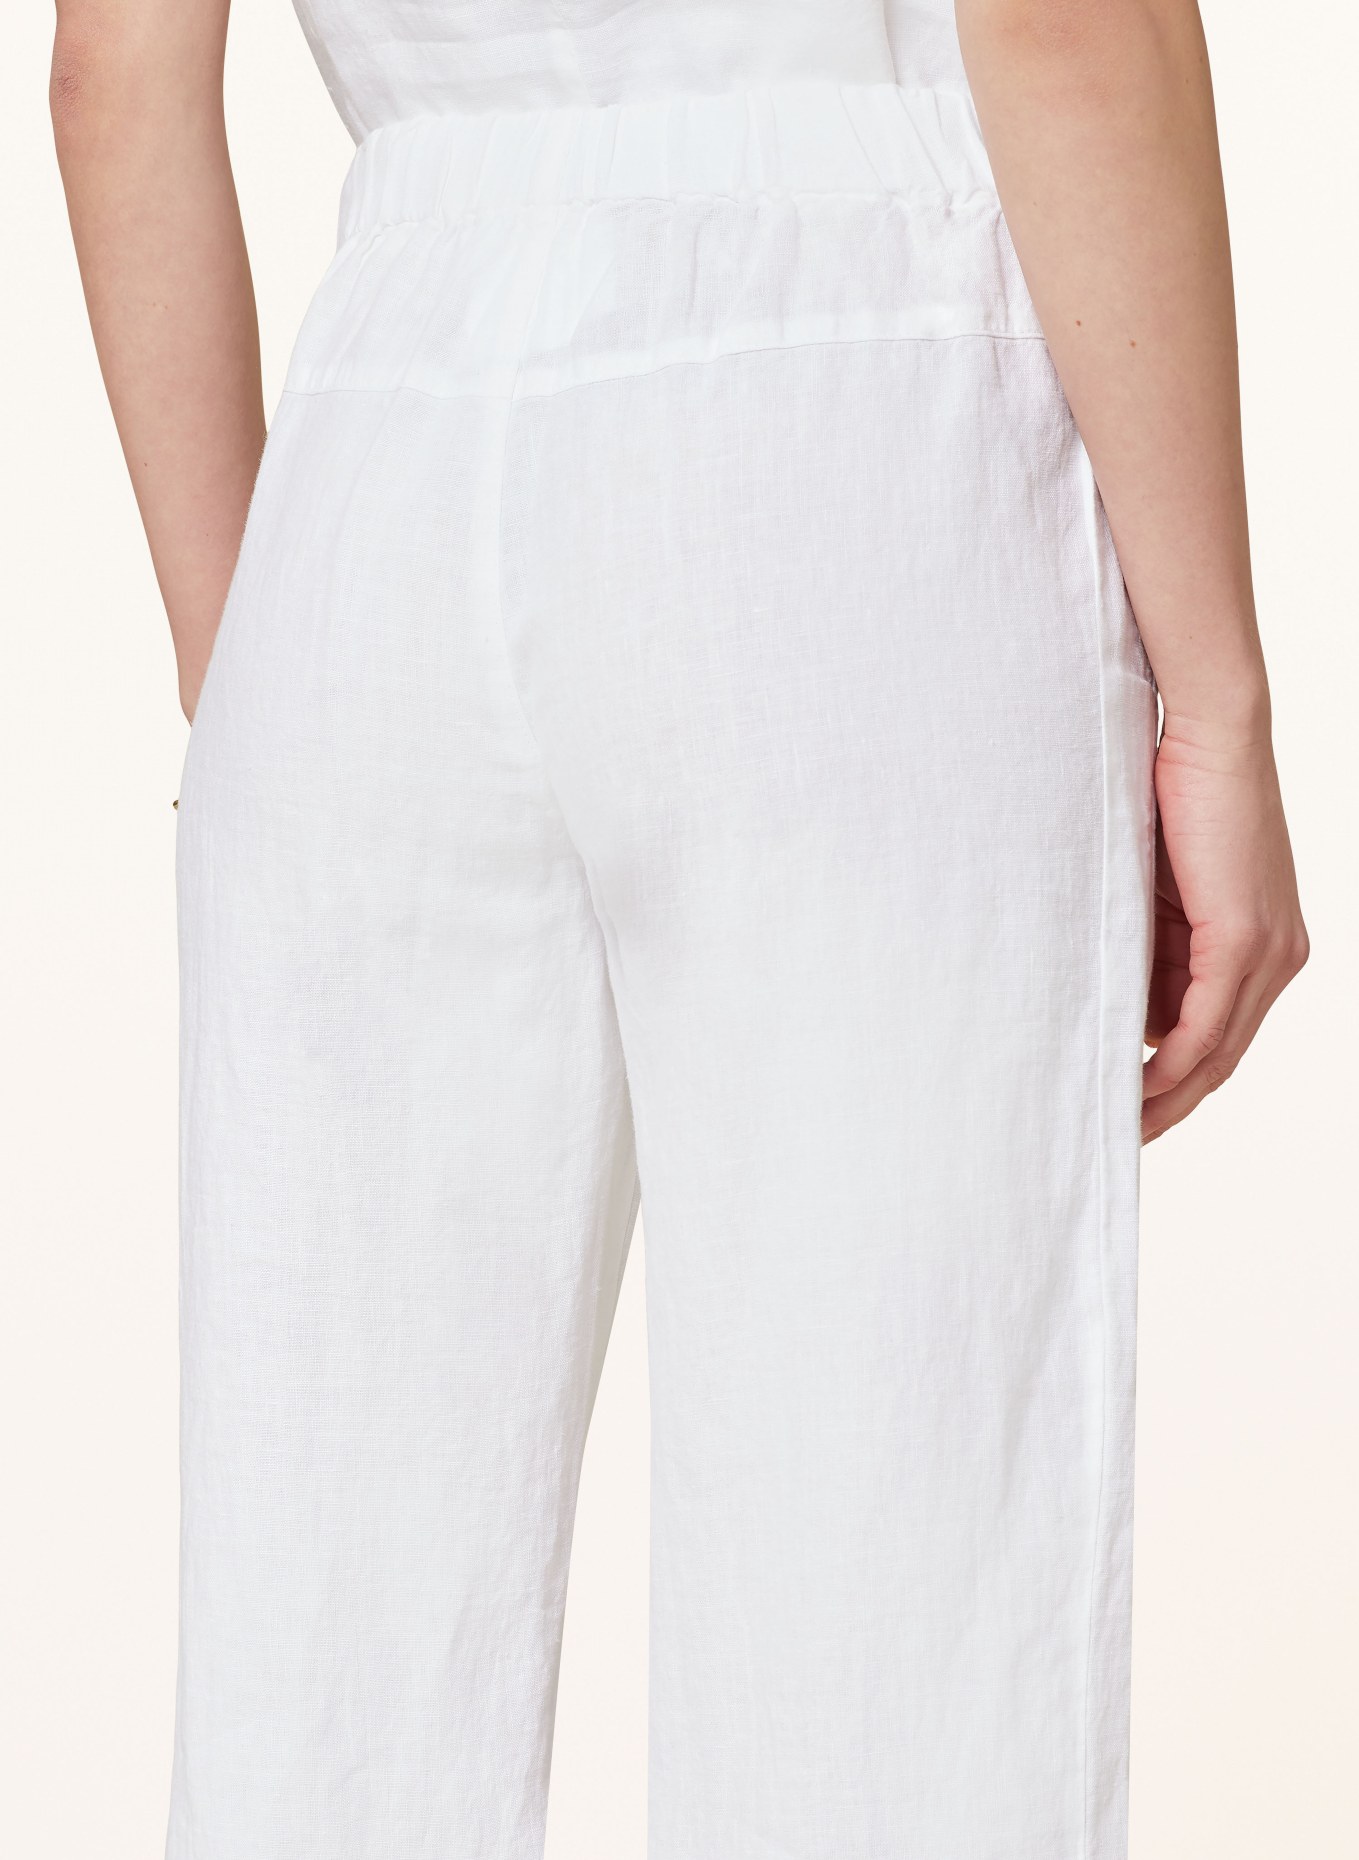 LANIUS 7/8 pants made of linen, Color: WHITE (Image 5)